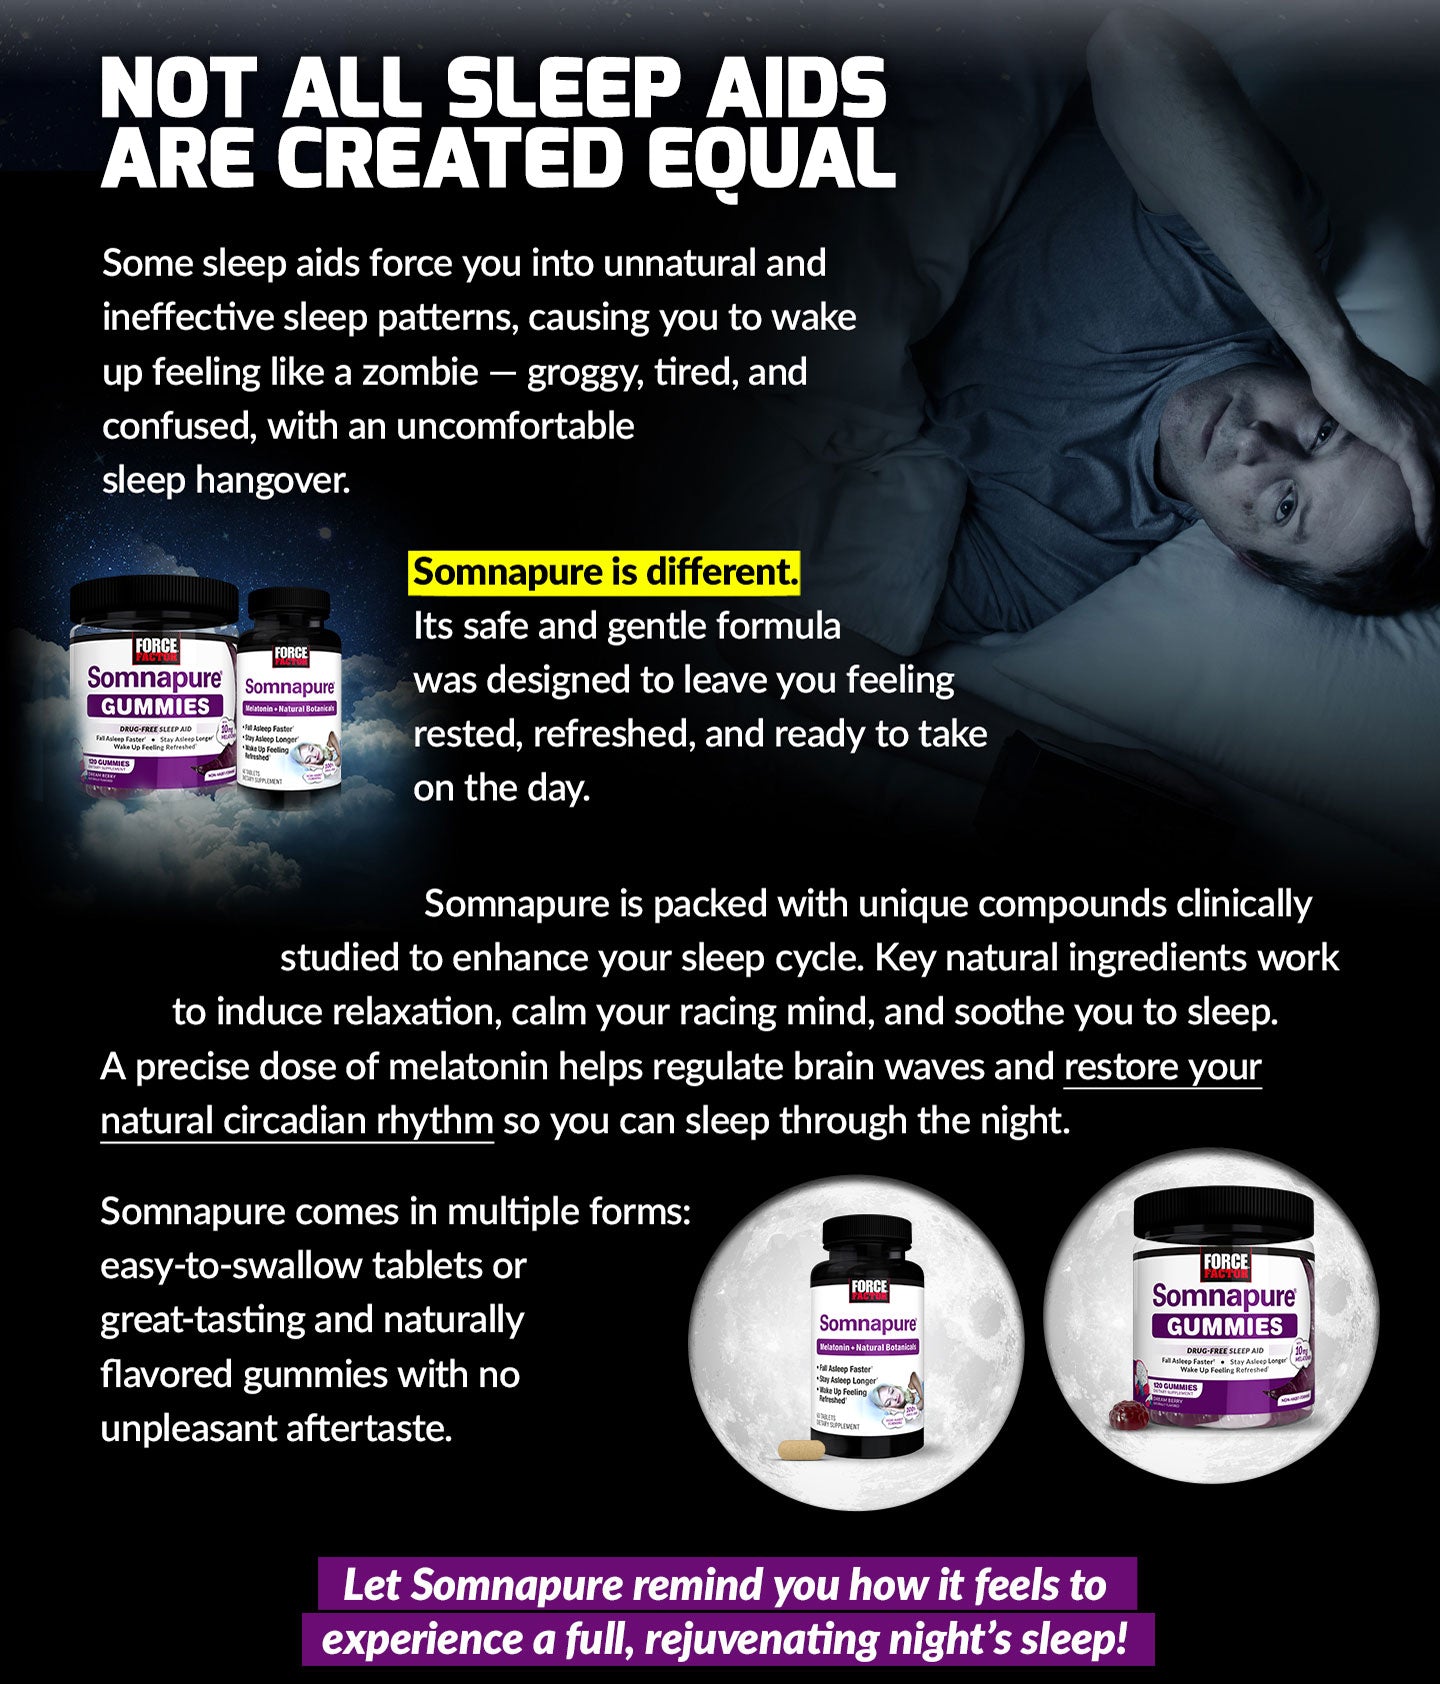 NOT ALL SLEEP AIDS ARE CREATED EQUAL. Some sleep aids force you into unnatural and ineffective sleep patterns, causing you to wake up feeling like a zombie – groggy, tired, and confused, with an uncomfortable sleep hangover. Somnapure is different. Its safe and gentle formula was designed to leave you feeling rested, refreshed, and ready to take on the day. Somnapure is packed full of unique compounds clinically studied to enhance your sleep cycle. Key natural ingredients work to induce relaxation, calm your racing mind, and soothe you to sleep. A precise dose of melatonin helps regulate brain waves and restore your natural circadian rhythm so you can sleep through the night. Somnapure comes in multiple forms: easy-to-swallow tablets or great-tasting and naturally flavored gummies with no unpleasant aftertaste. Let Somnapure remind you how it feels to experience a full, rejuvenating night’s sleep!